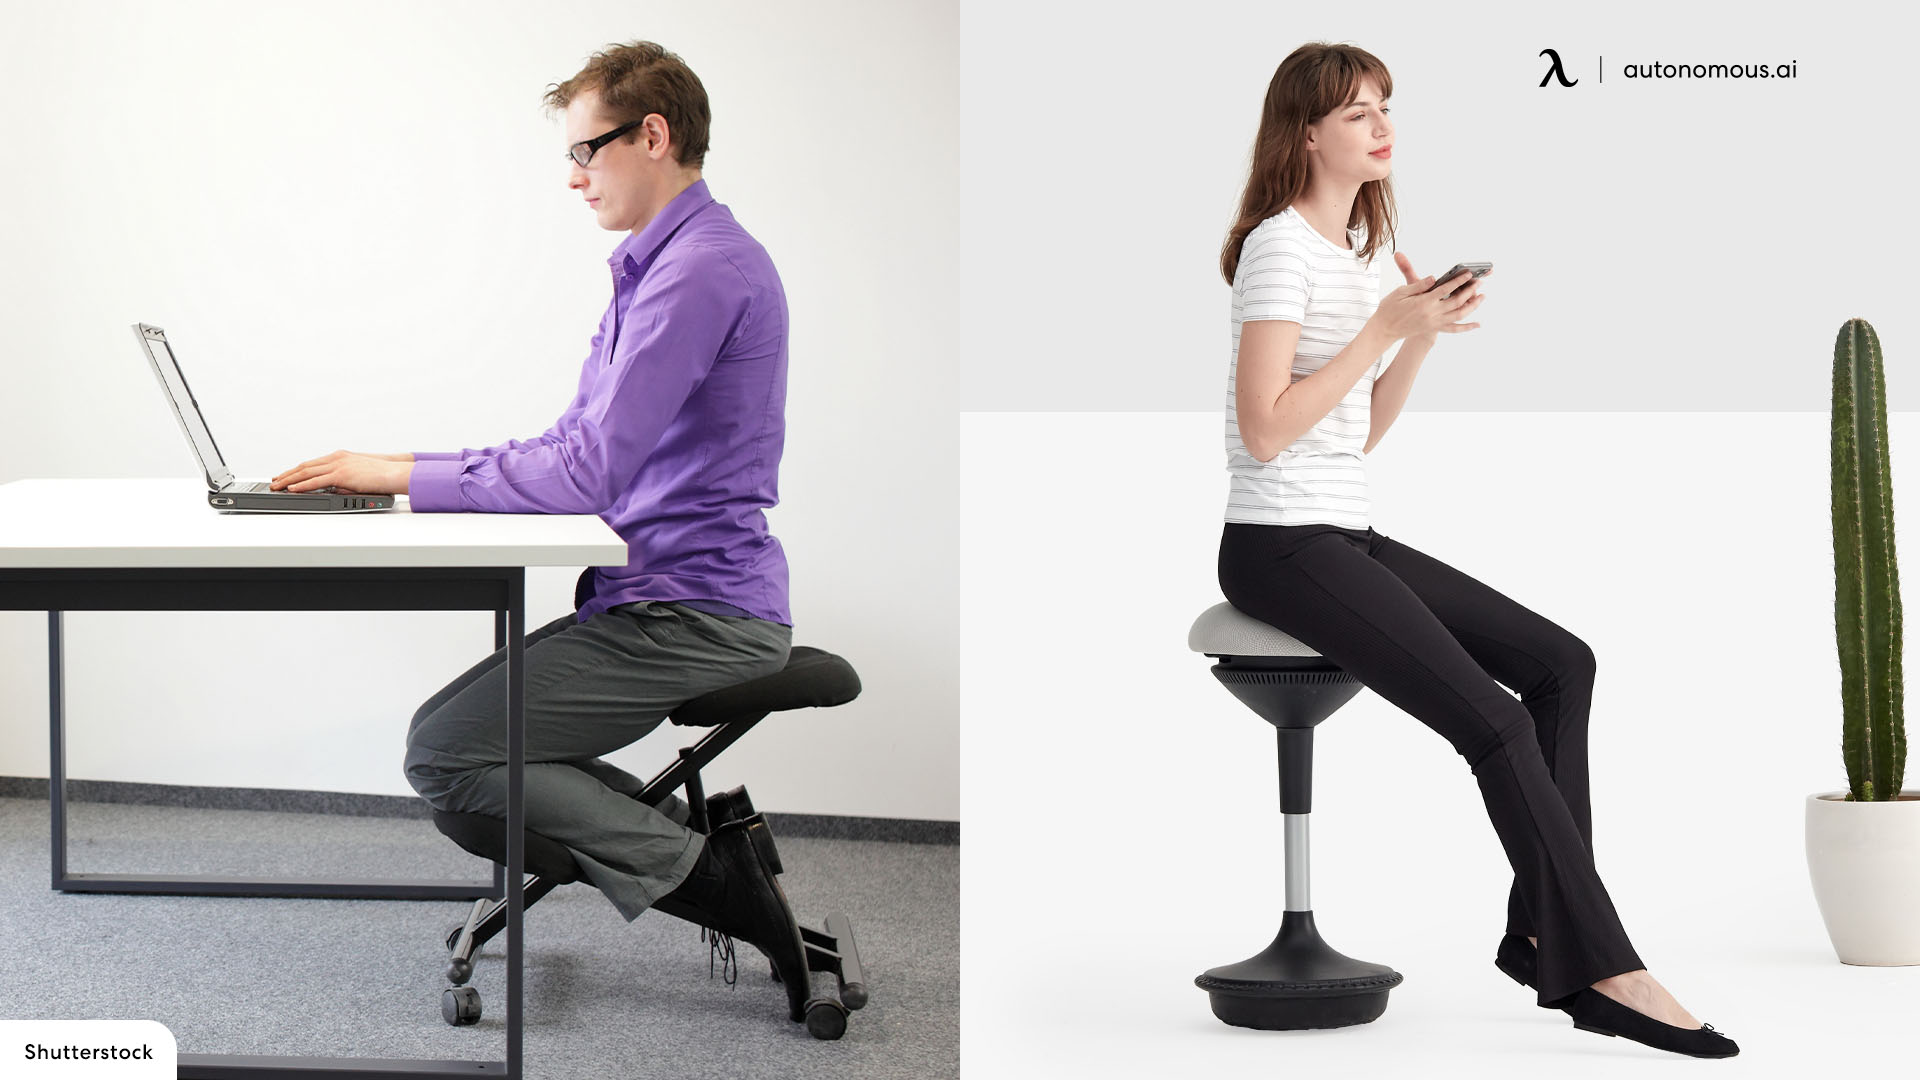 Kneeling Chair vs. Ergonomic Stool: Which One is Better